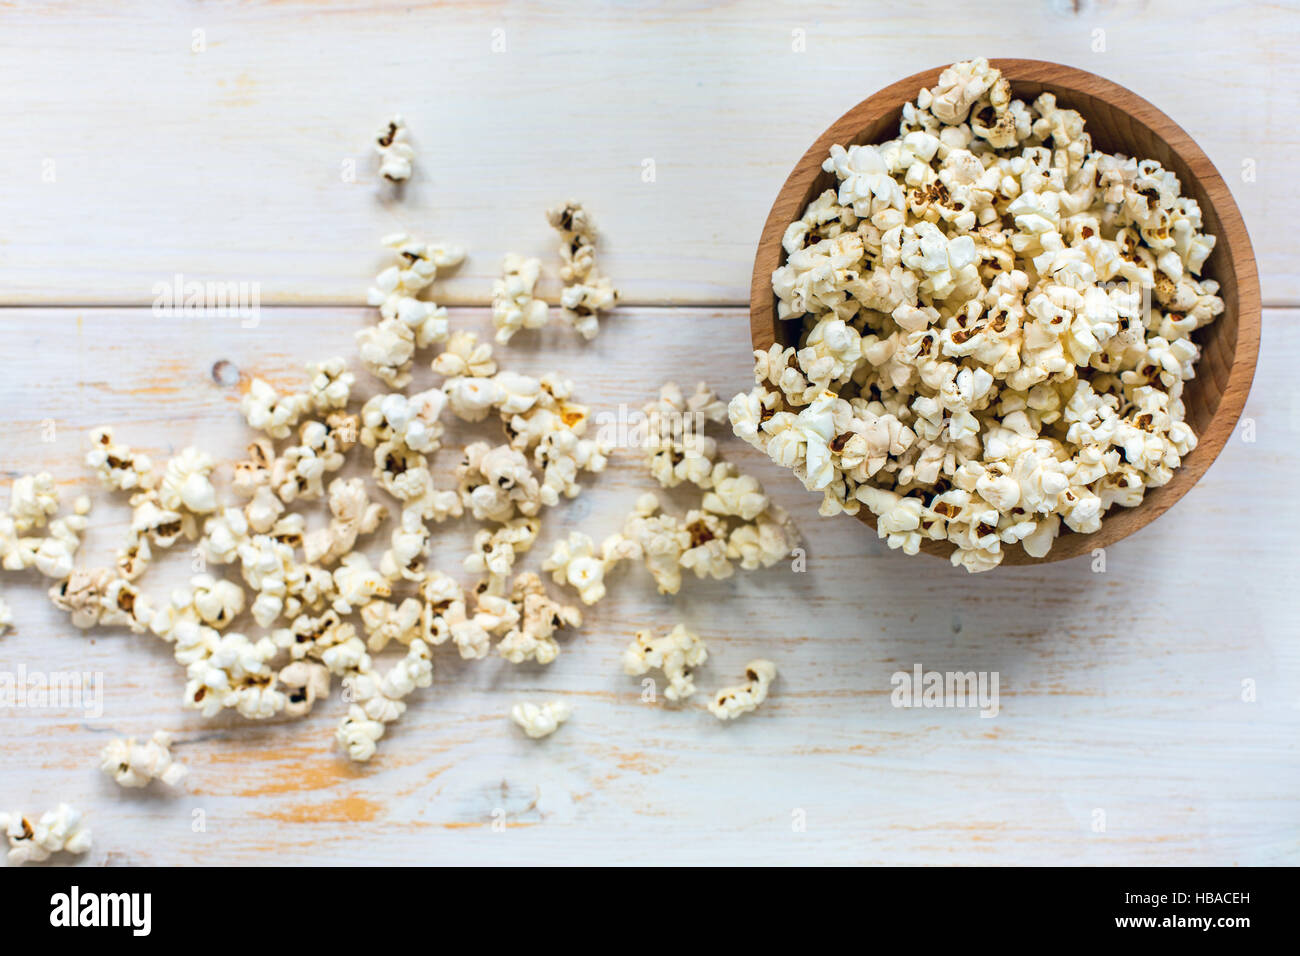 Bowl with popcorn. View from above. Stock Photo